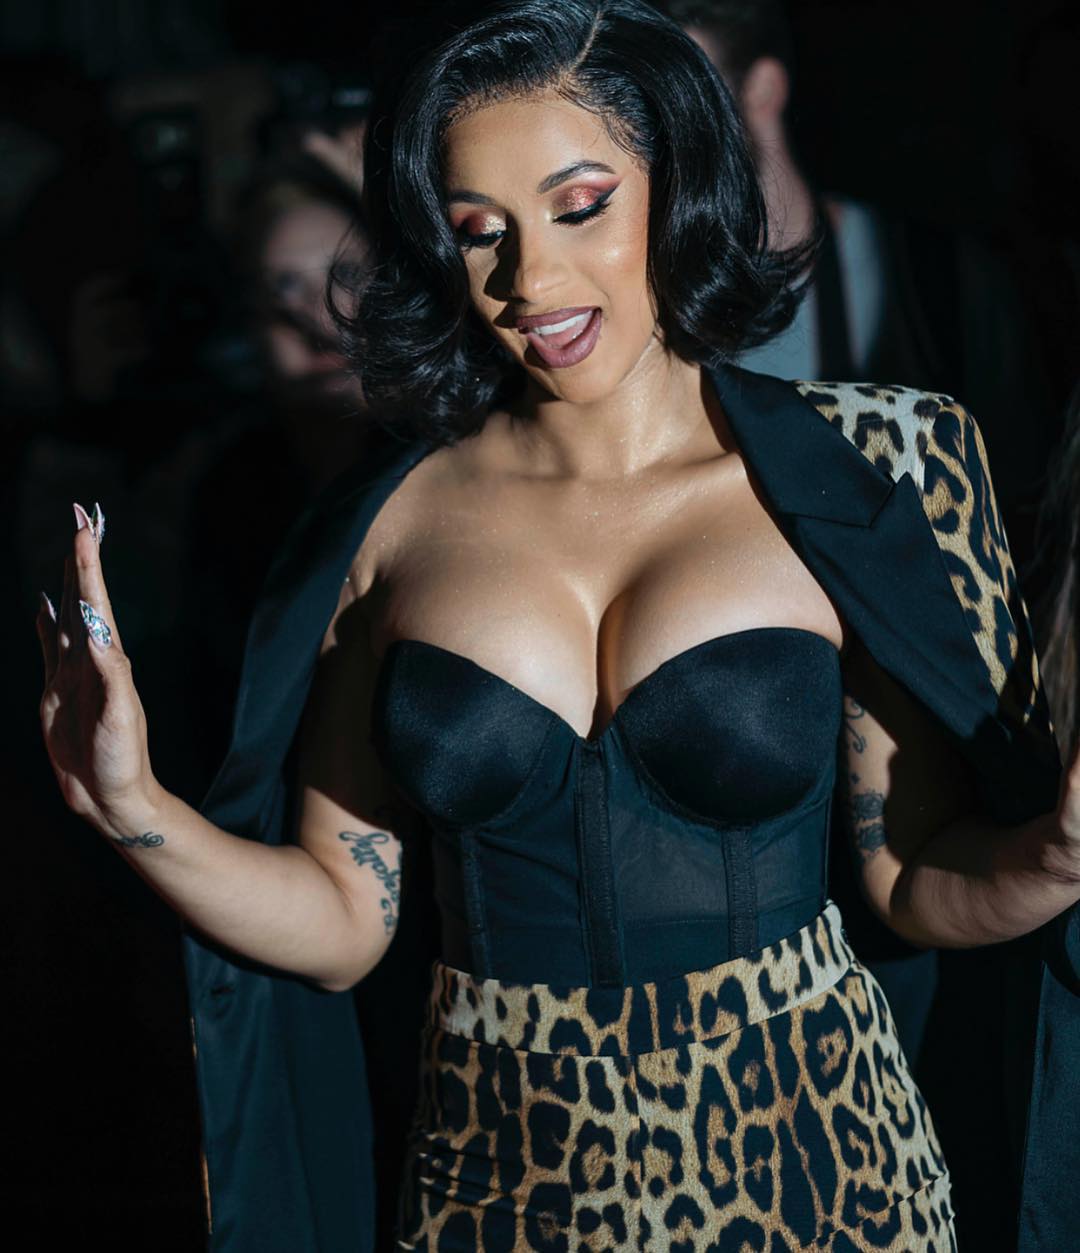 Cardi B reveals she's getting new Breast Implants following her Pregnancy